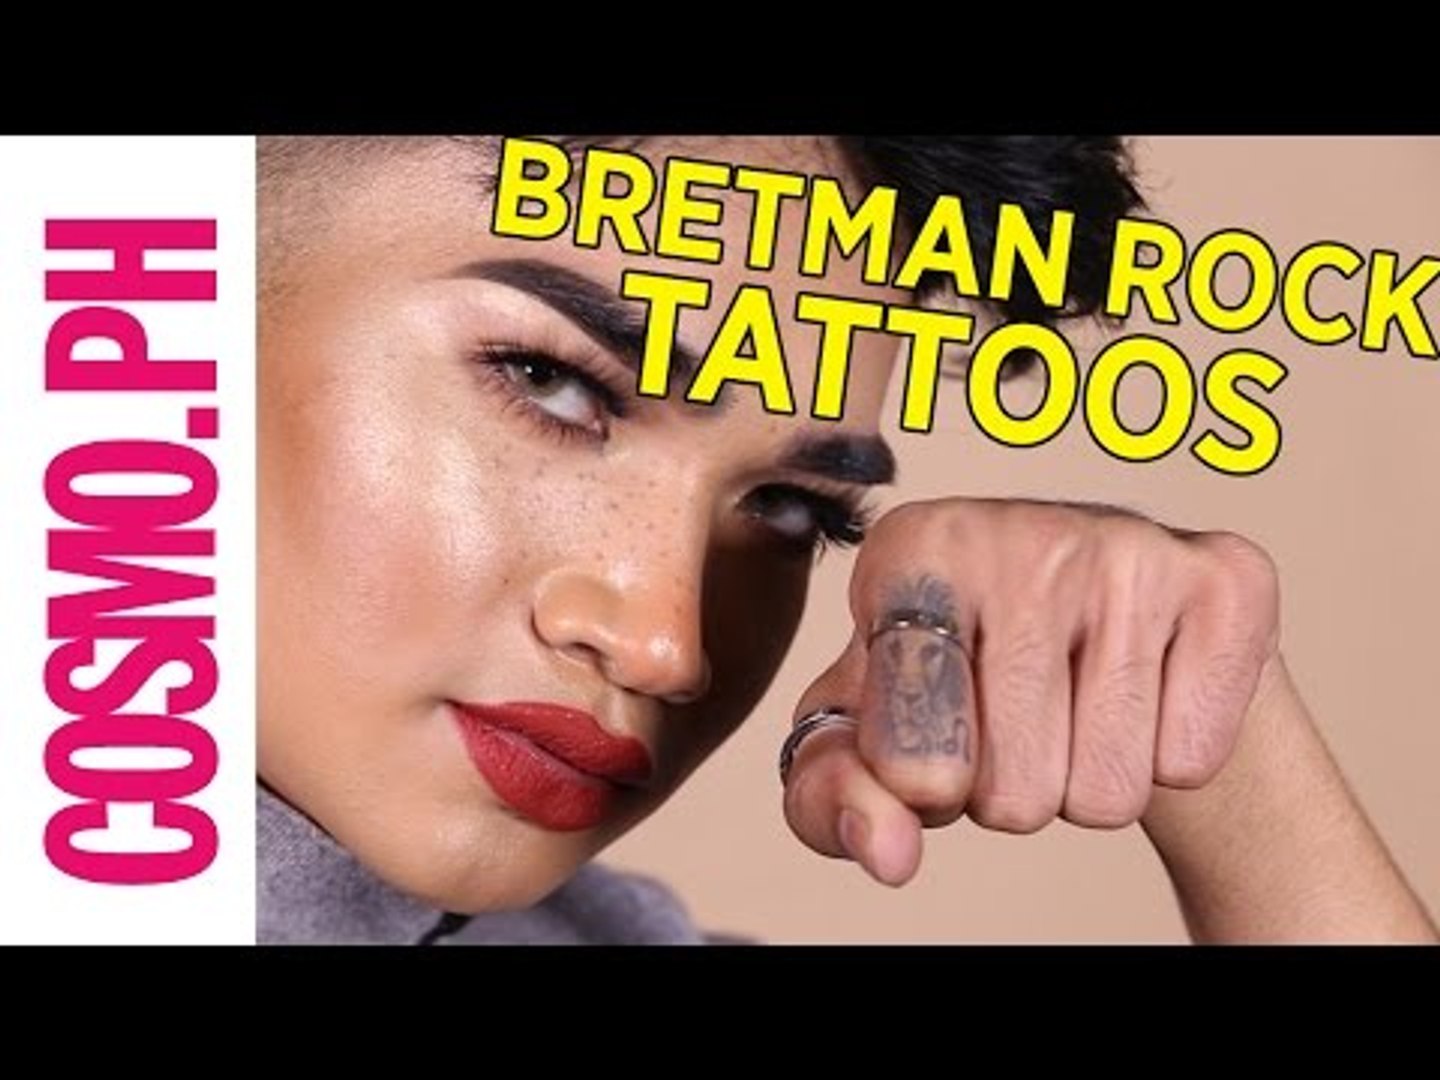 Bretman Rock Shows Off His Tattoos - video Dailymotion